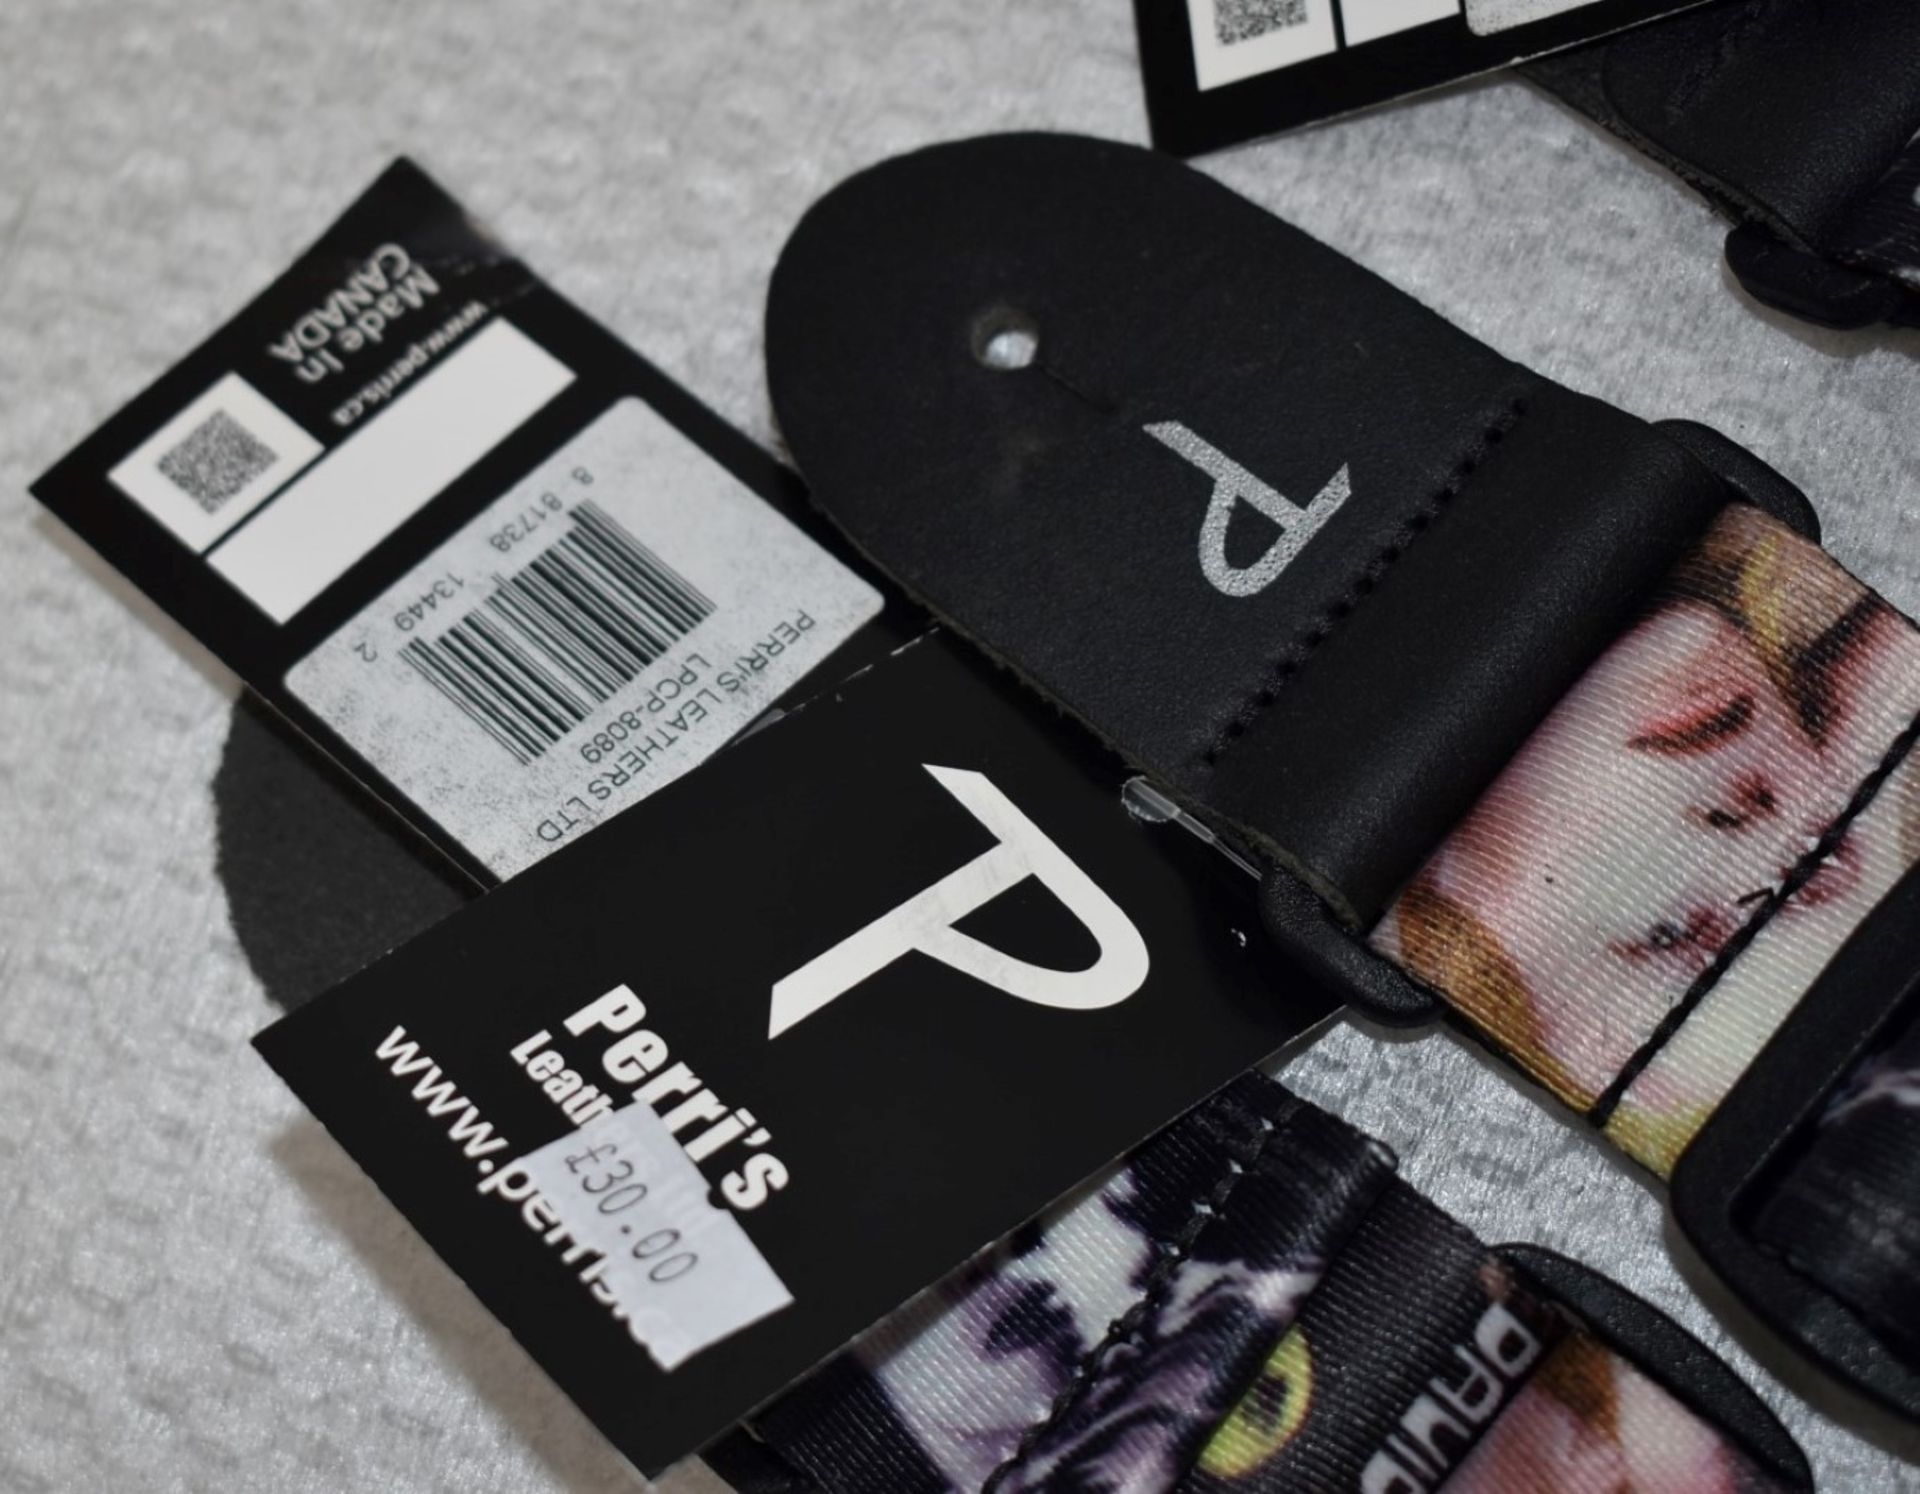 3 x David Bowie Guitar Straps by Perri's - Officially Licensed Merchandise - RRP £90 - New & Unused - Image 5 of 8